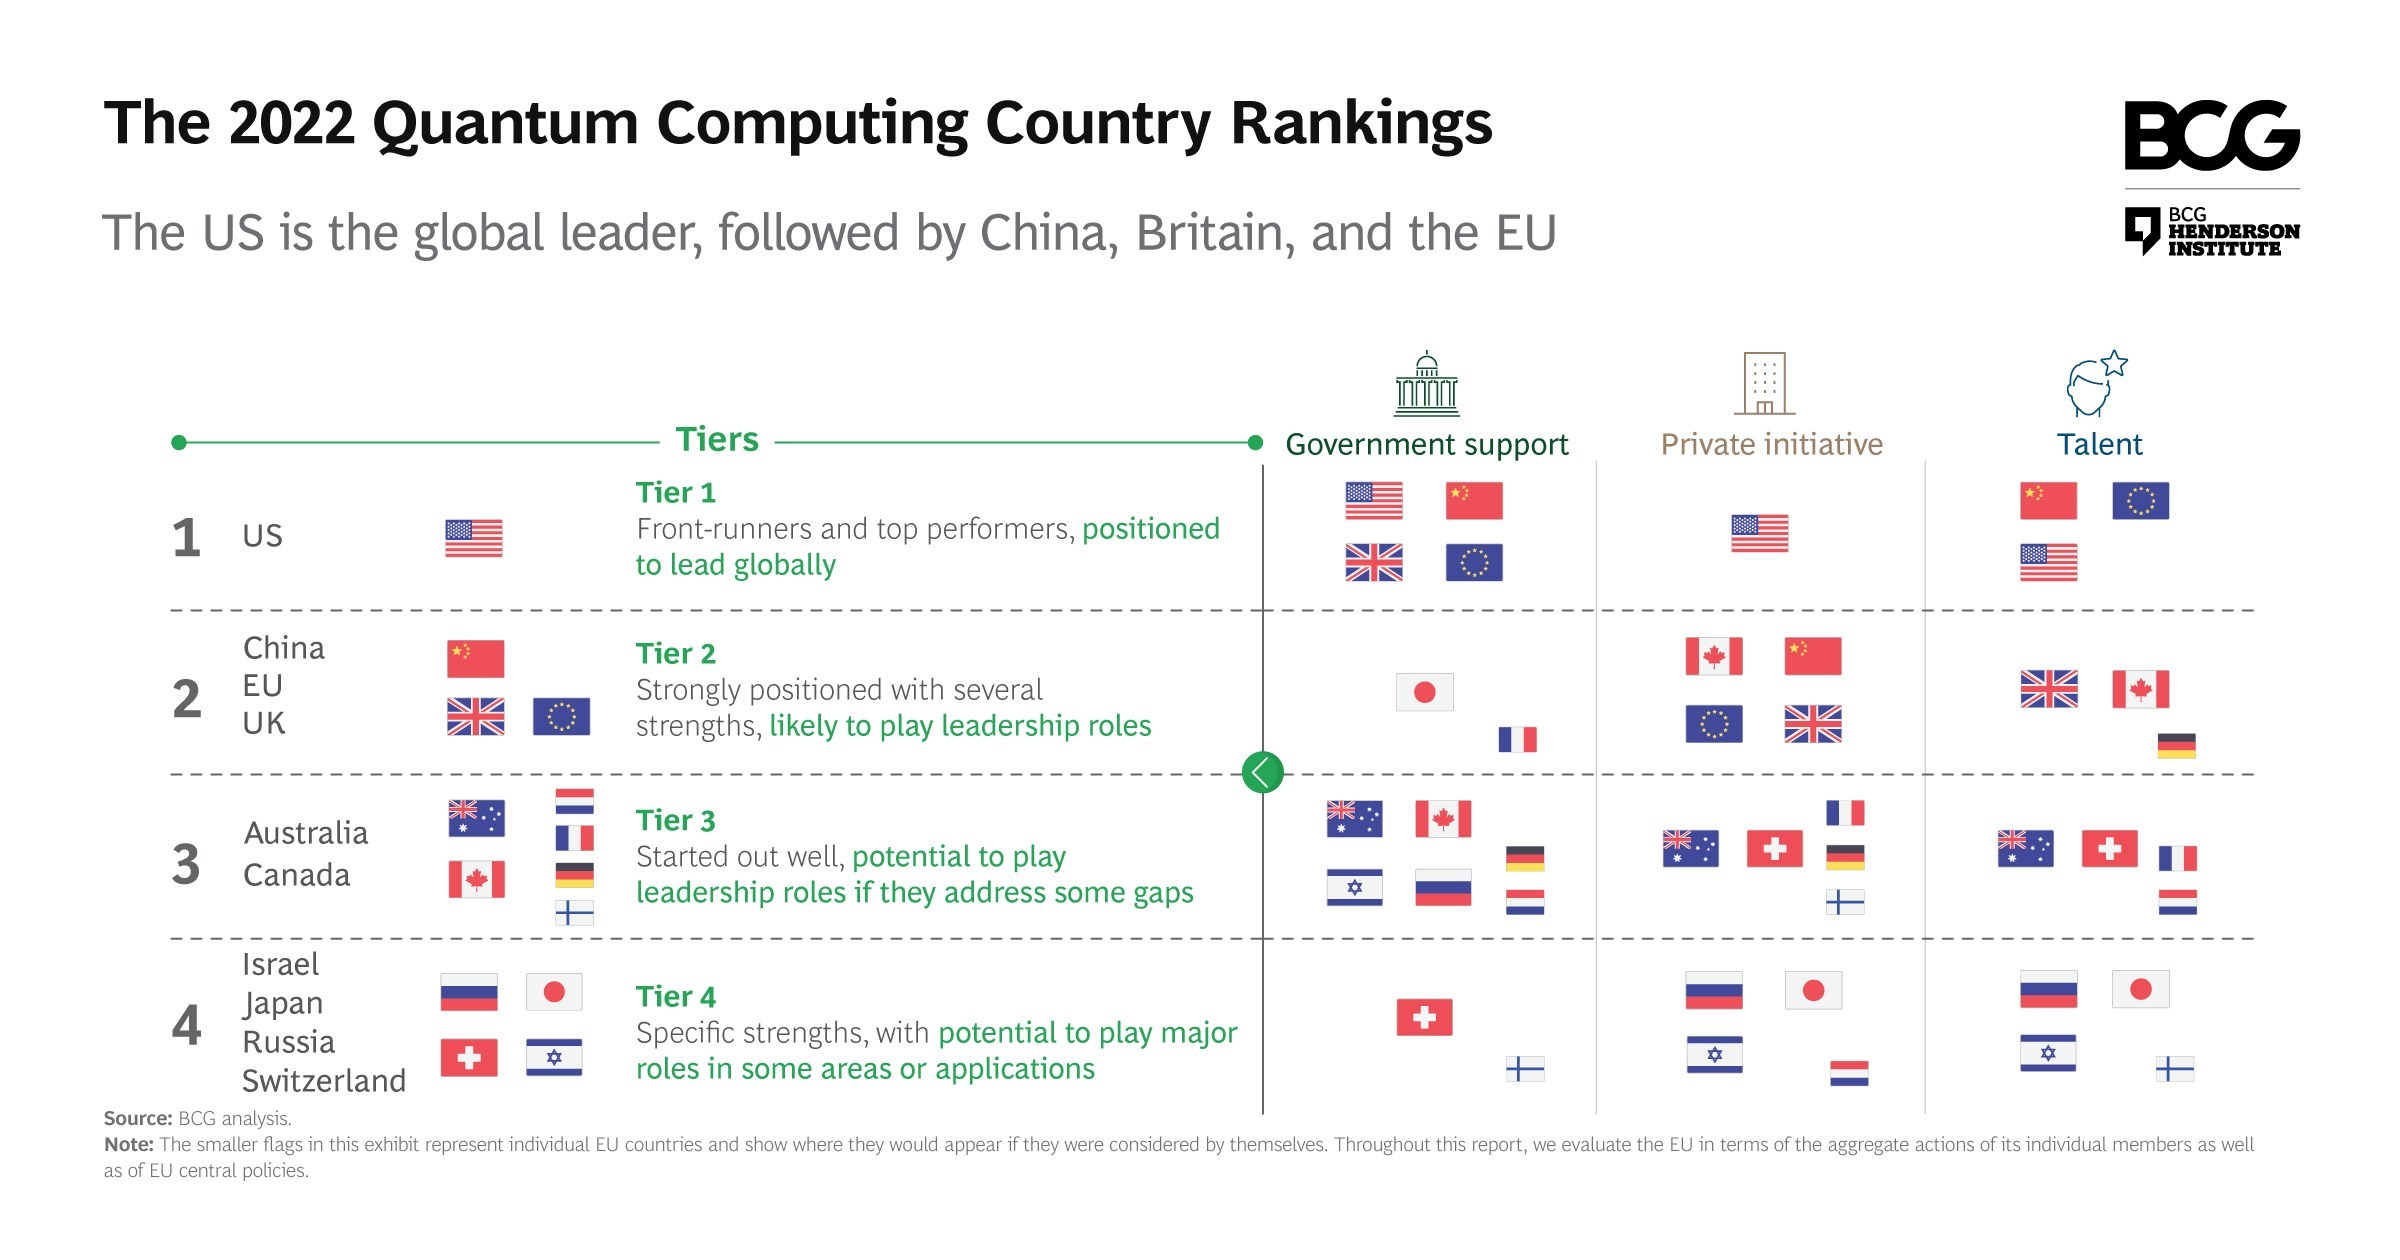 Can Europe Catch Up With the US (and China) in Quantum Computing?